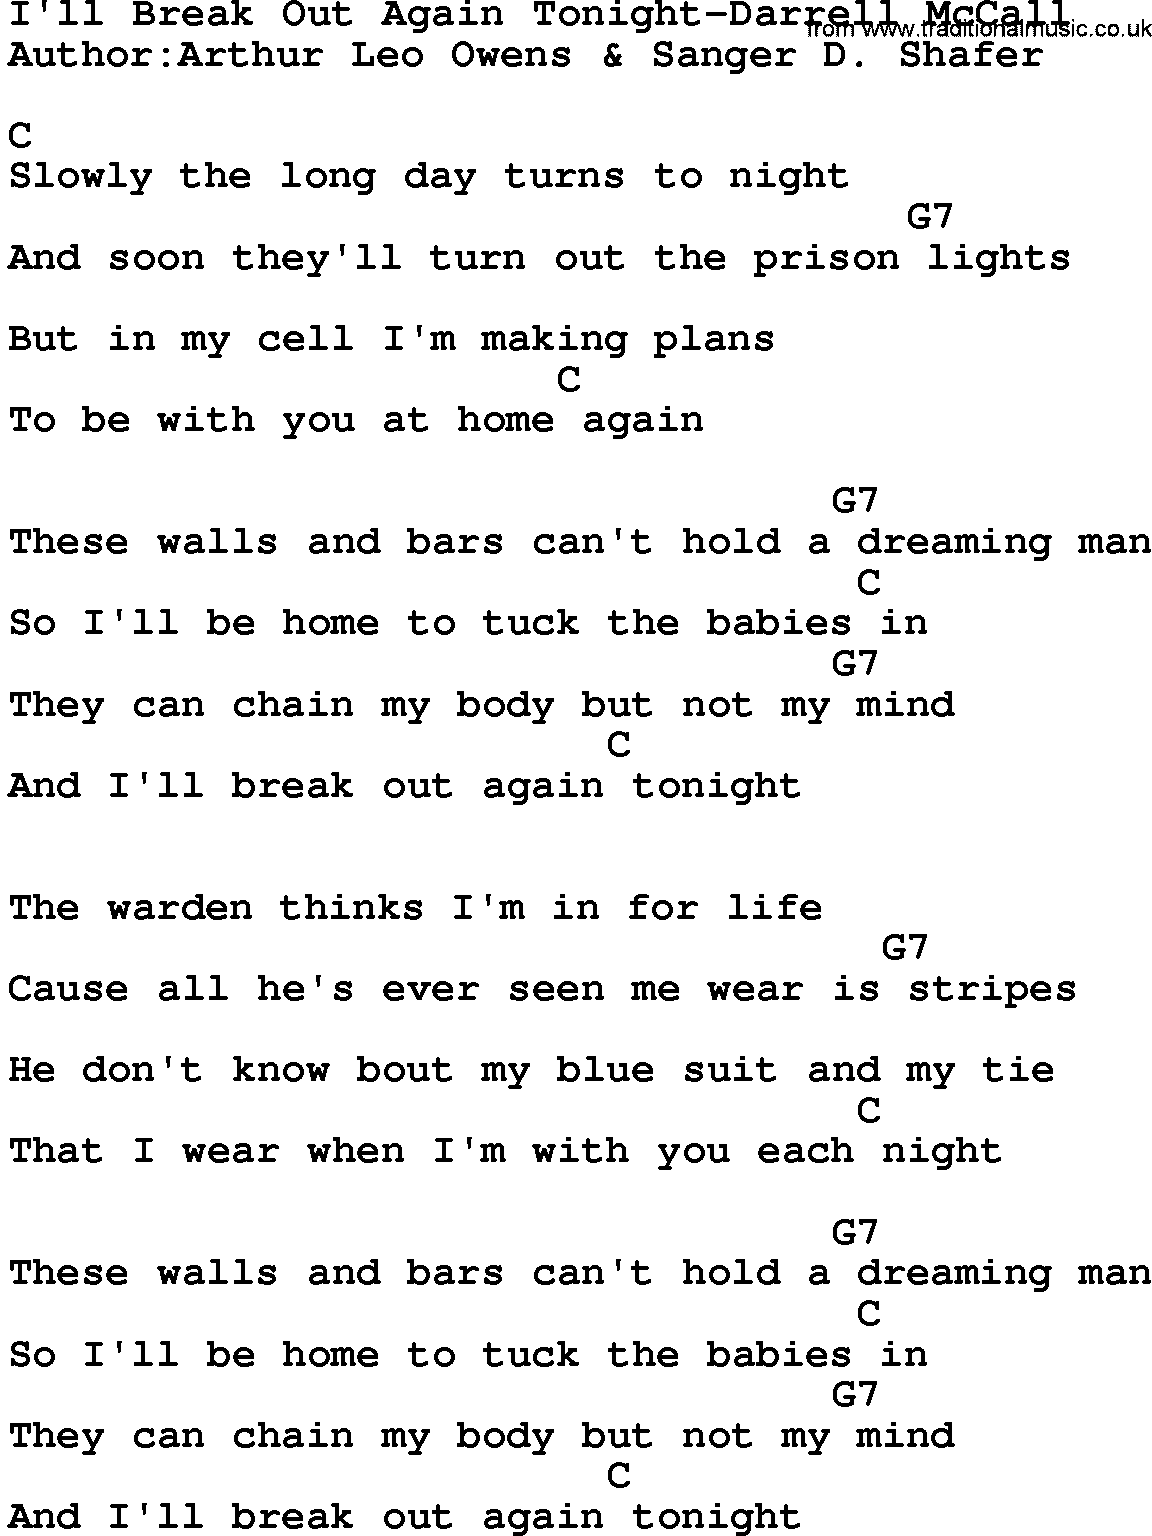 Country music song: I'll Break Out Again Tonight-Darrell Mccall lyrics and chords